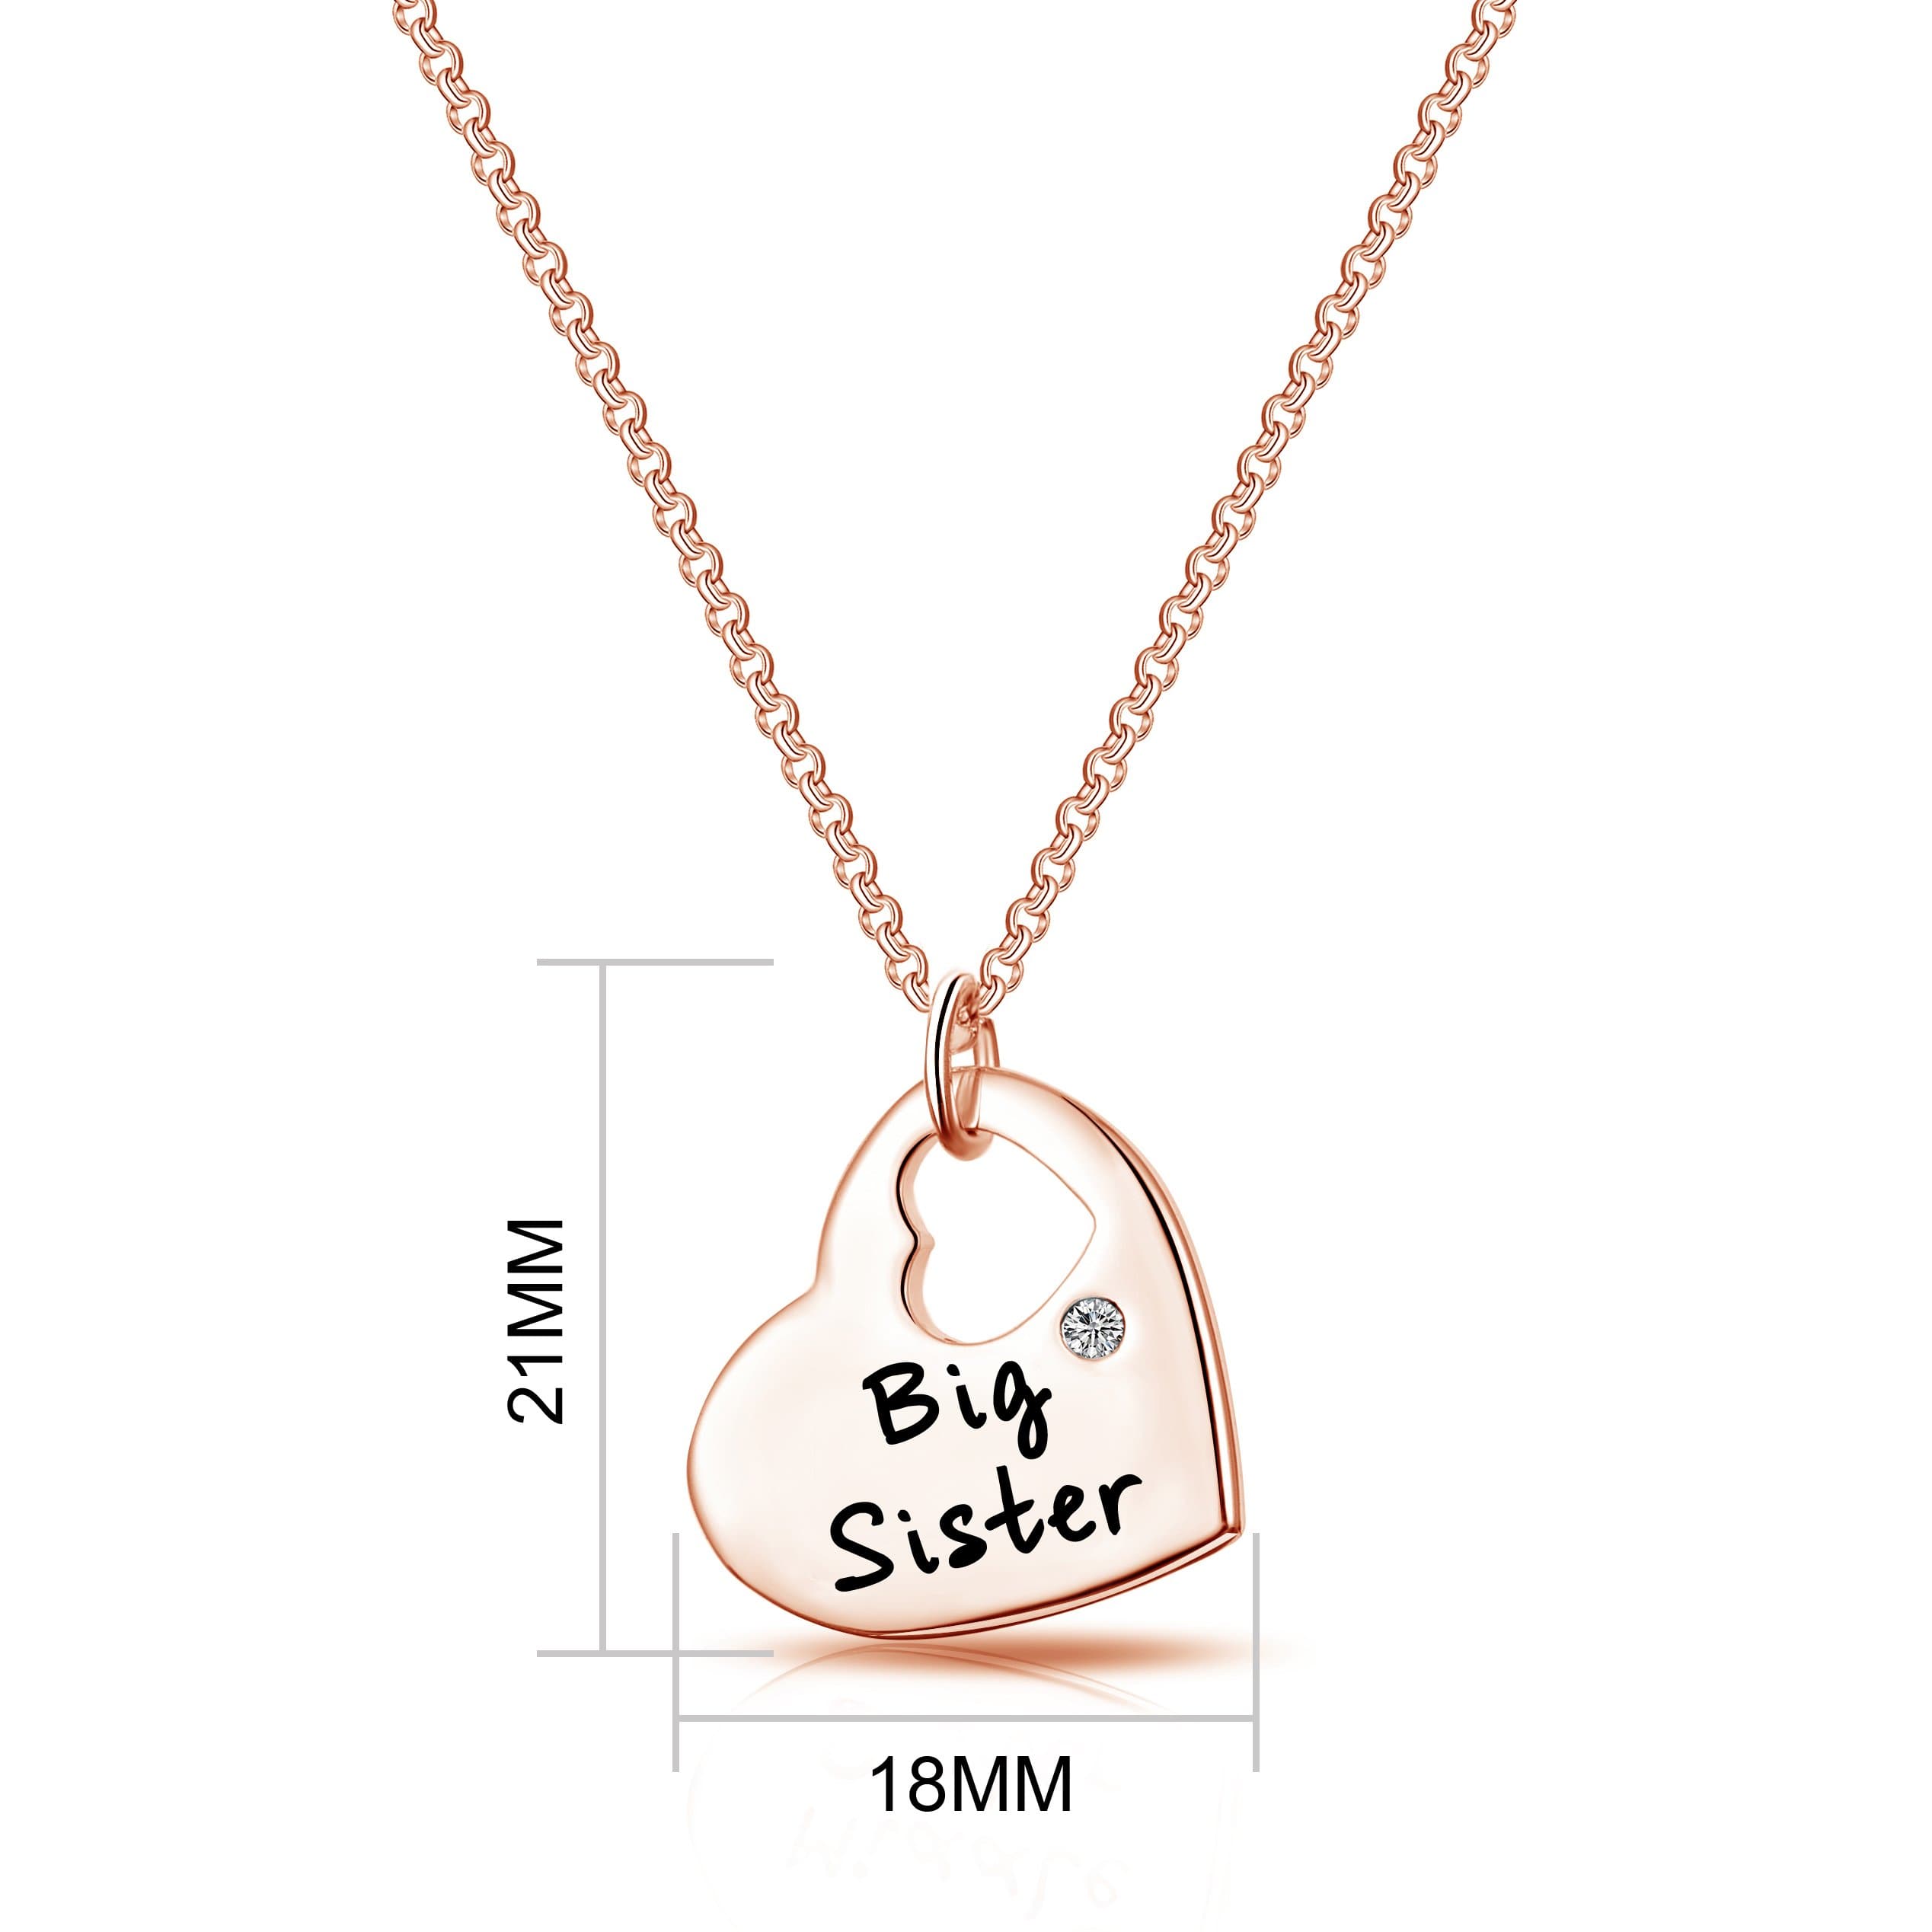 Rose Gold Plated Big Sister Heart Necklace with Quote Card Created with Zircondia® Crystals